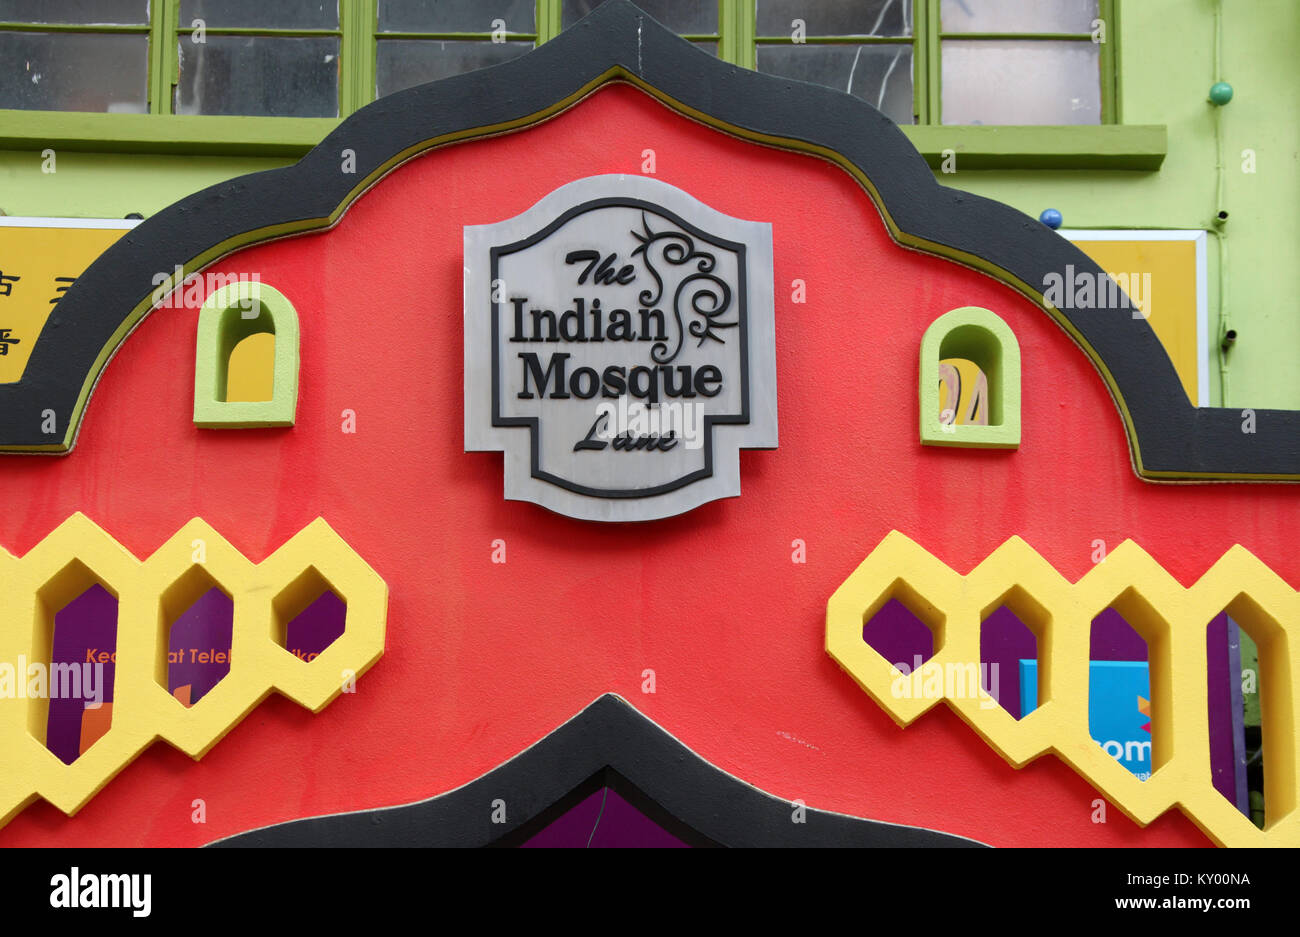 The Indian Mosque Lane sign in Kuching Stock Photo